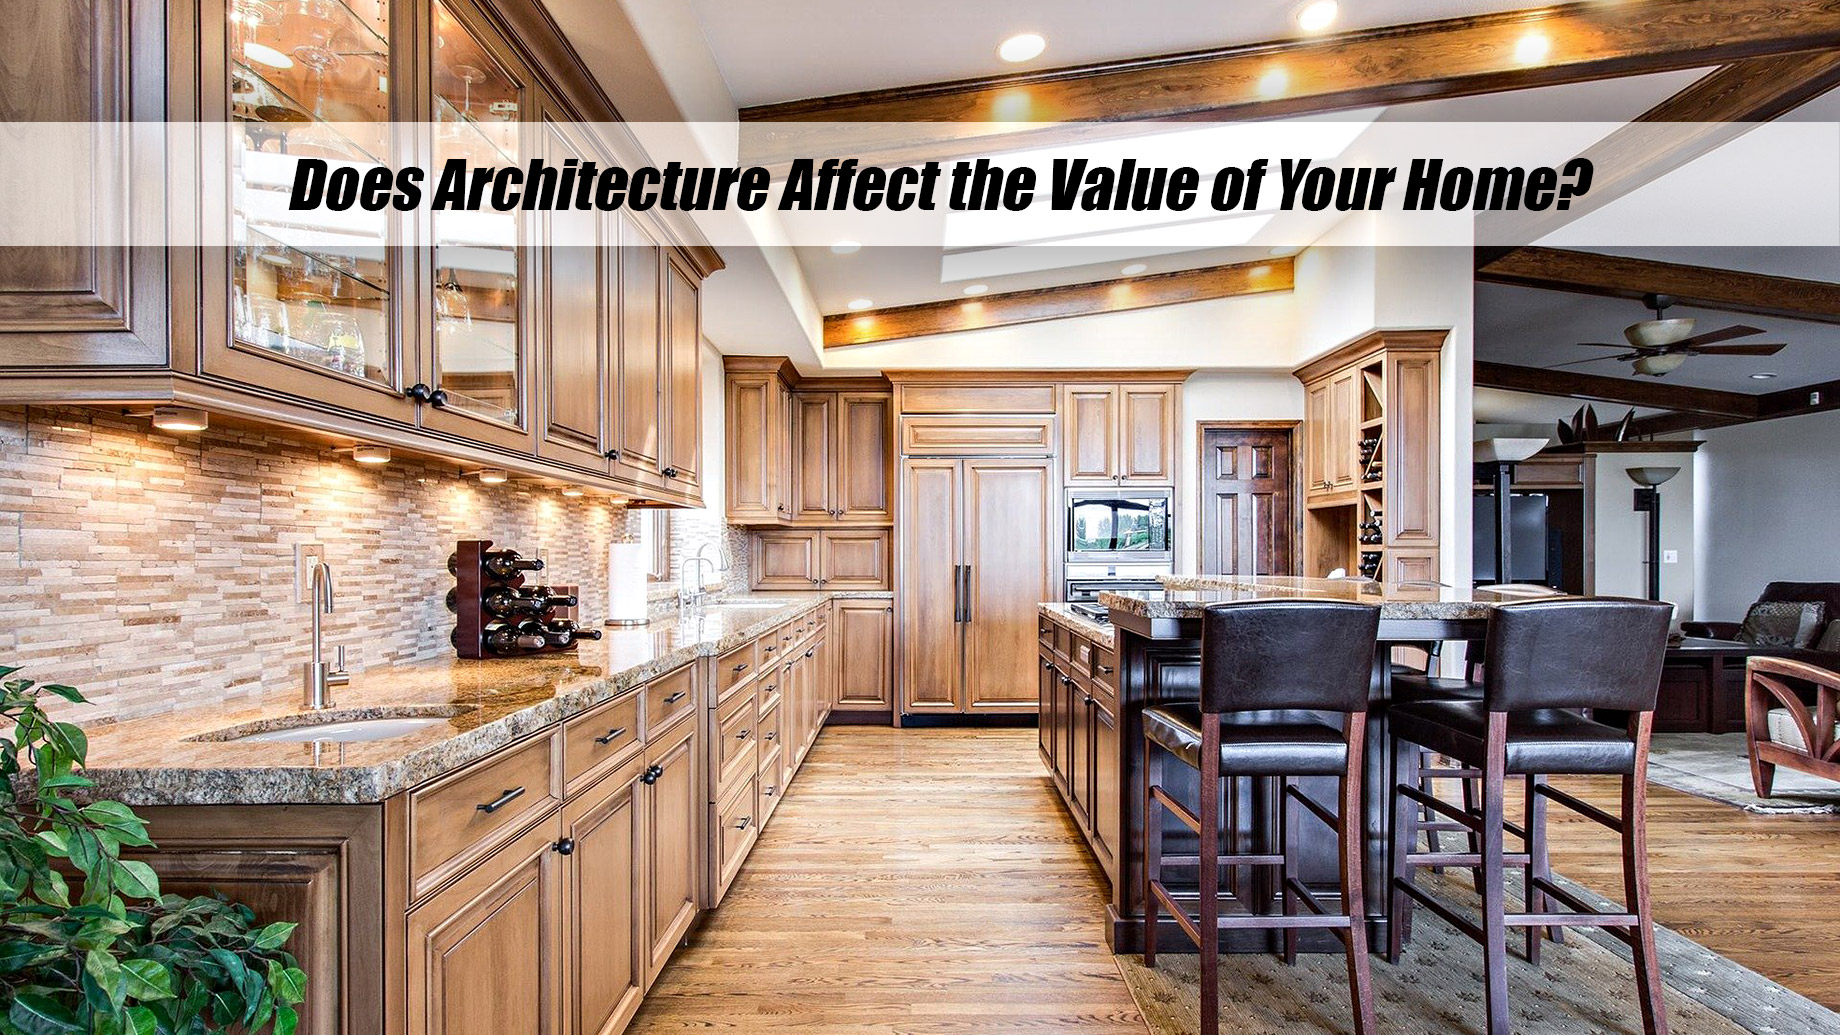 Does Architecture Affect the Value of Your Home?